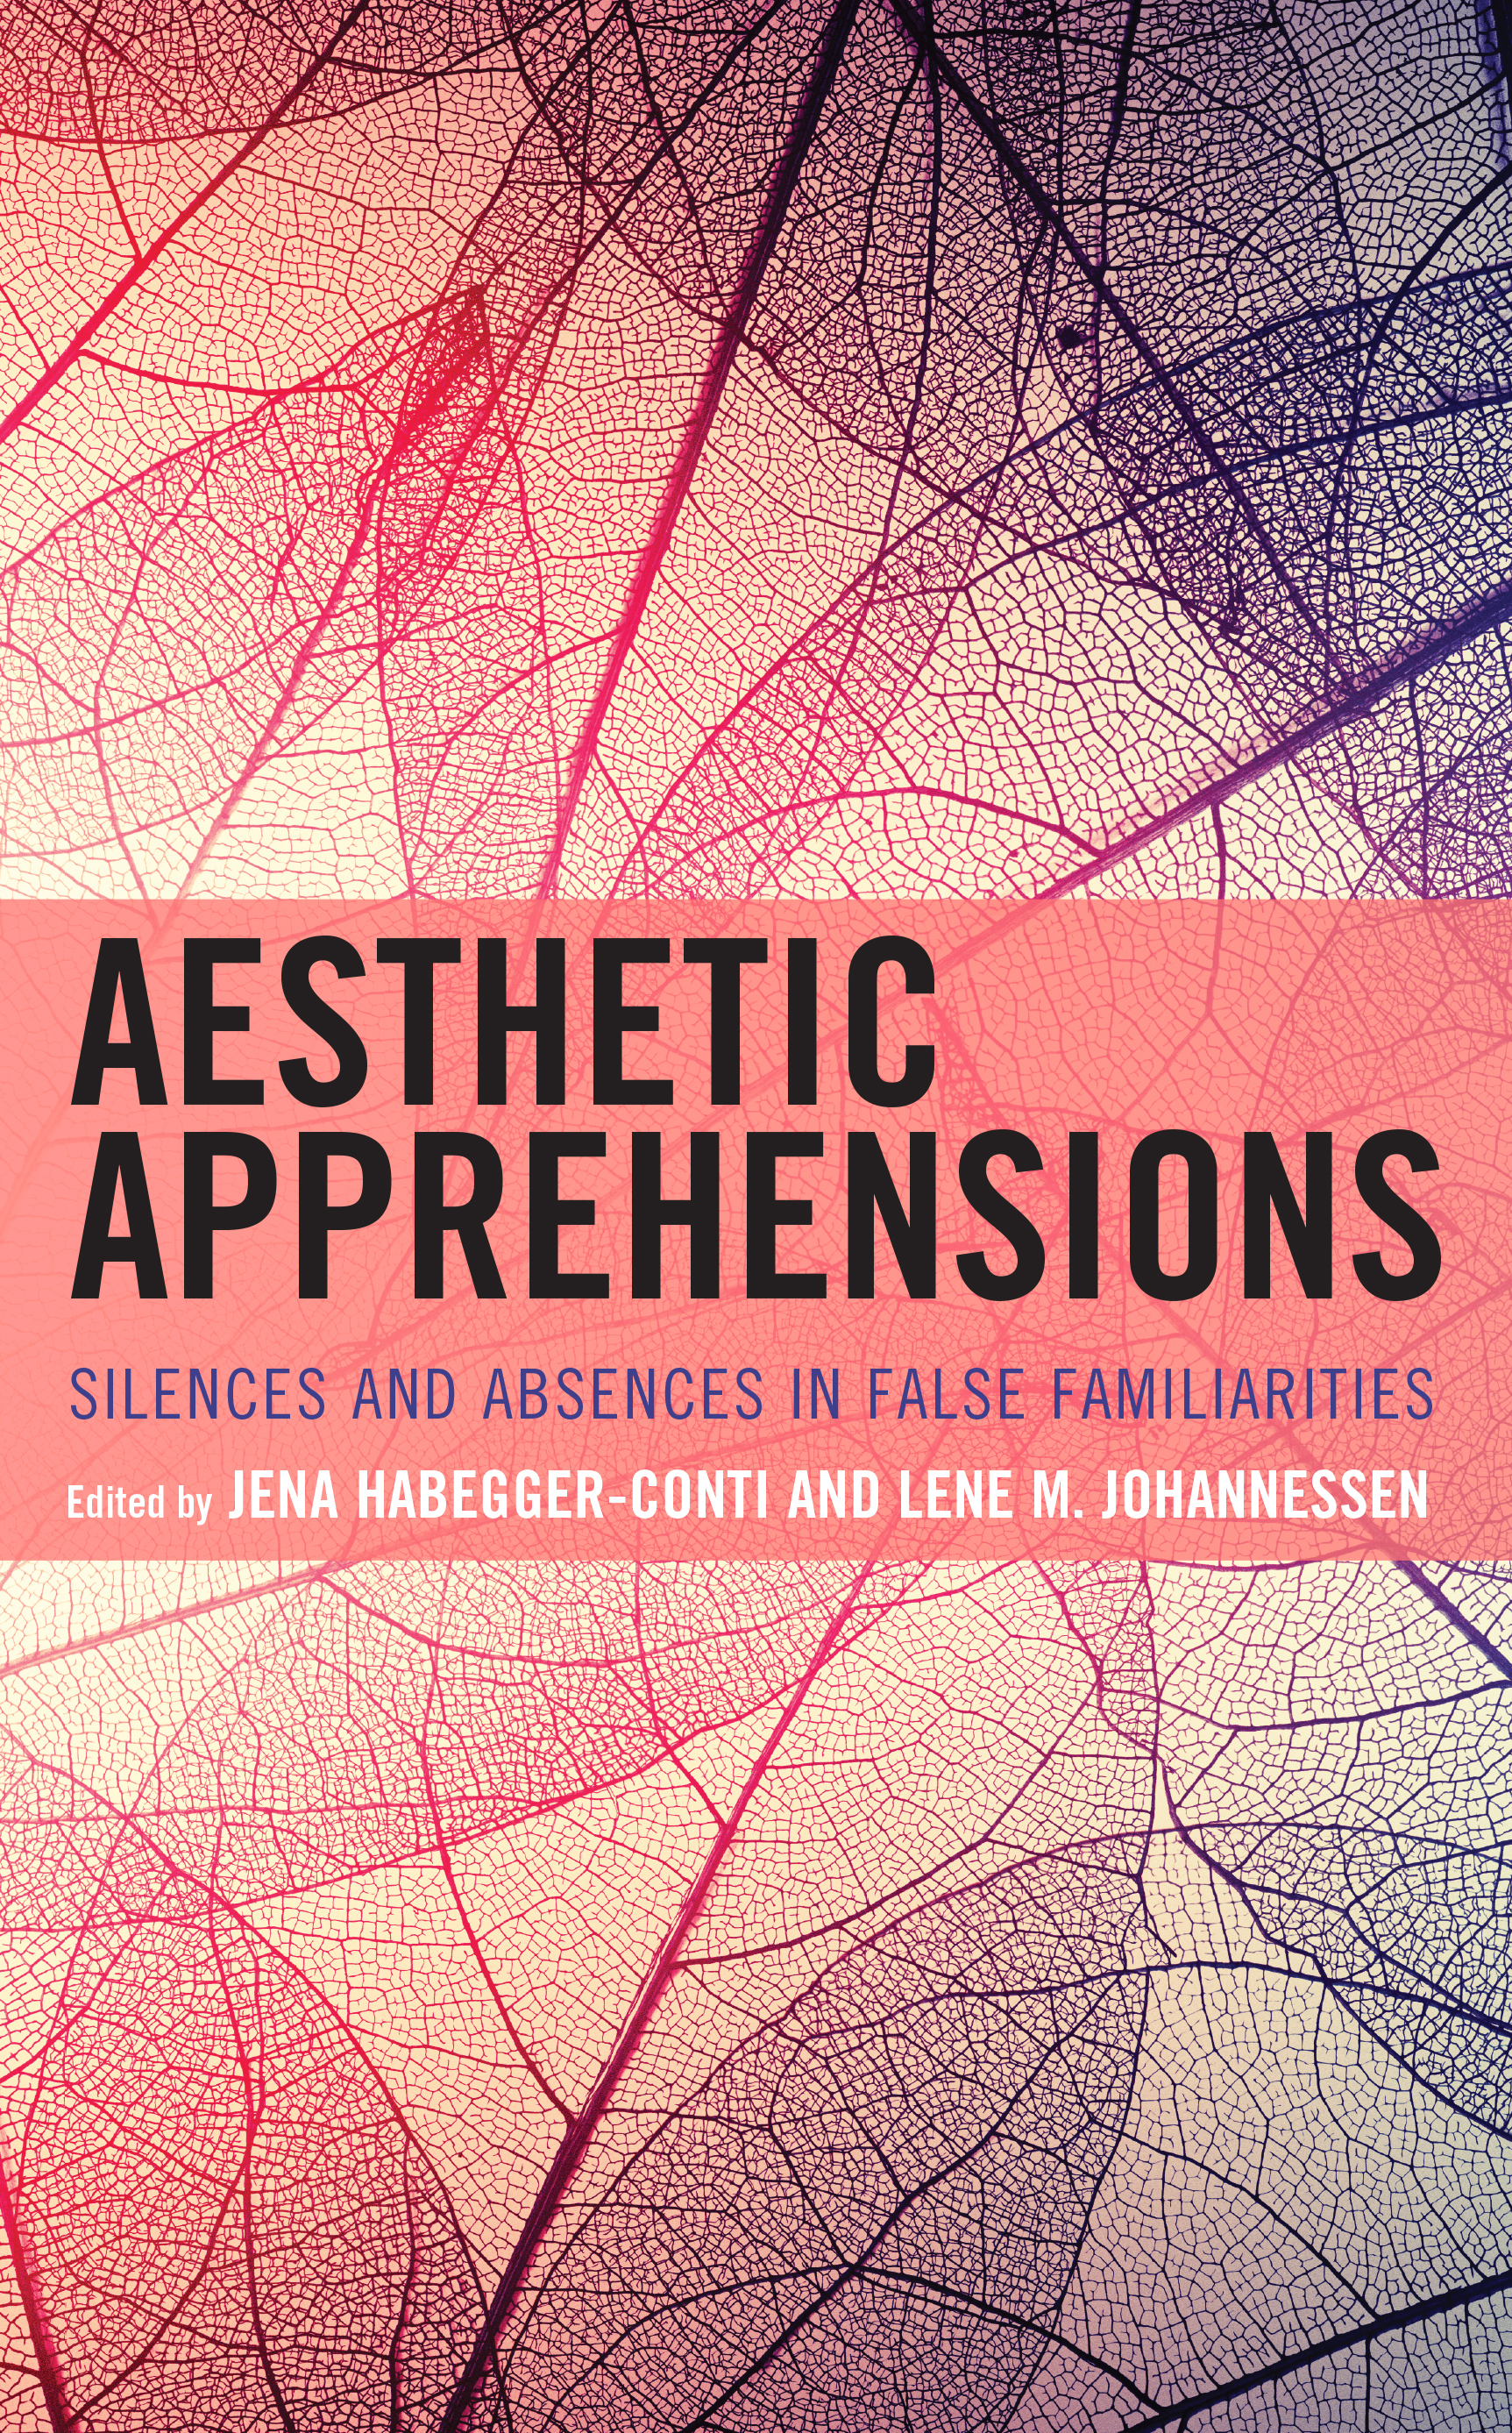 Aesthetic Apprehensions: Silence and Absence in False Familiarities